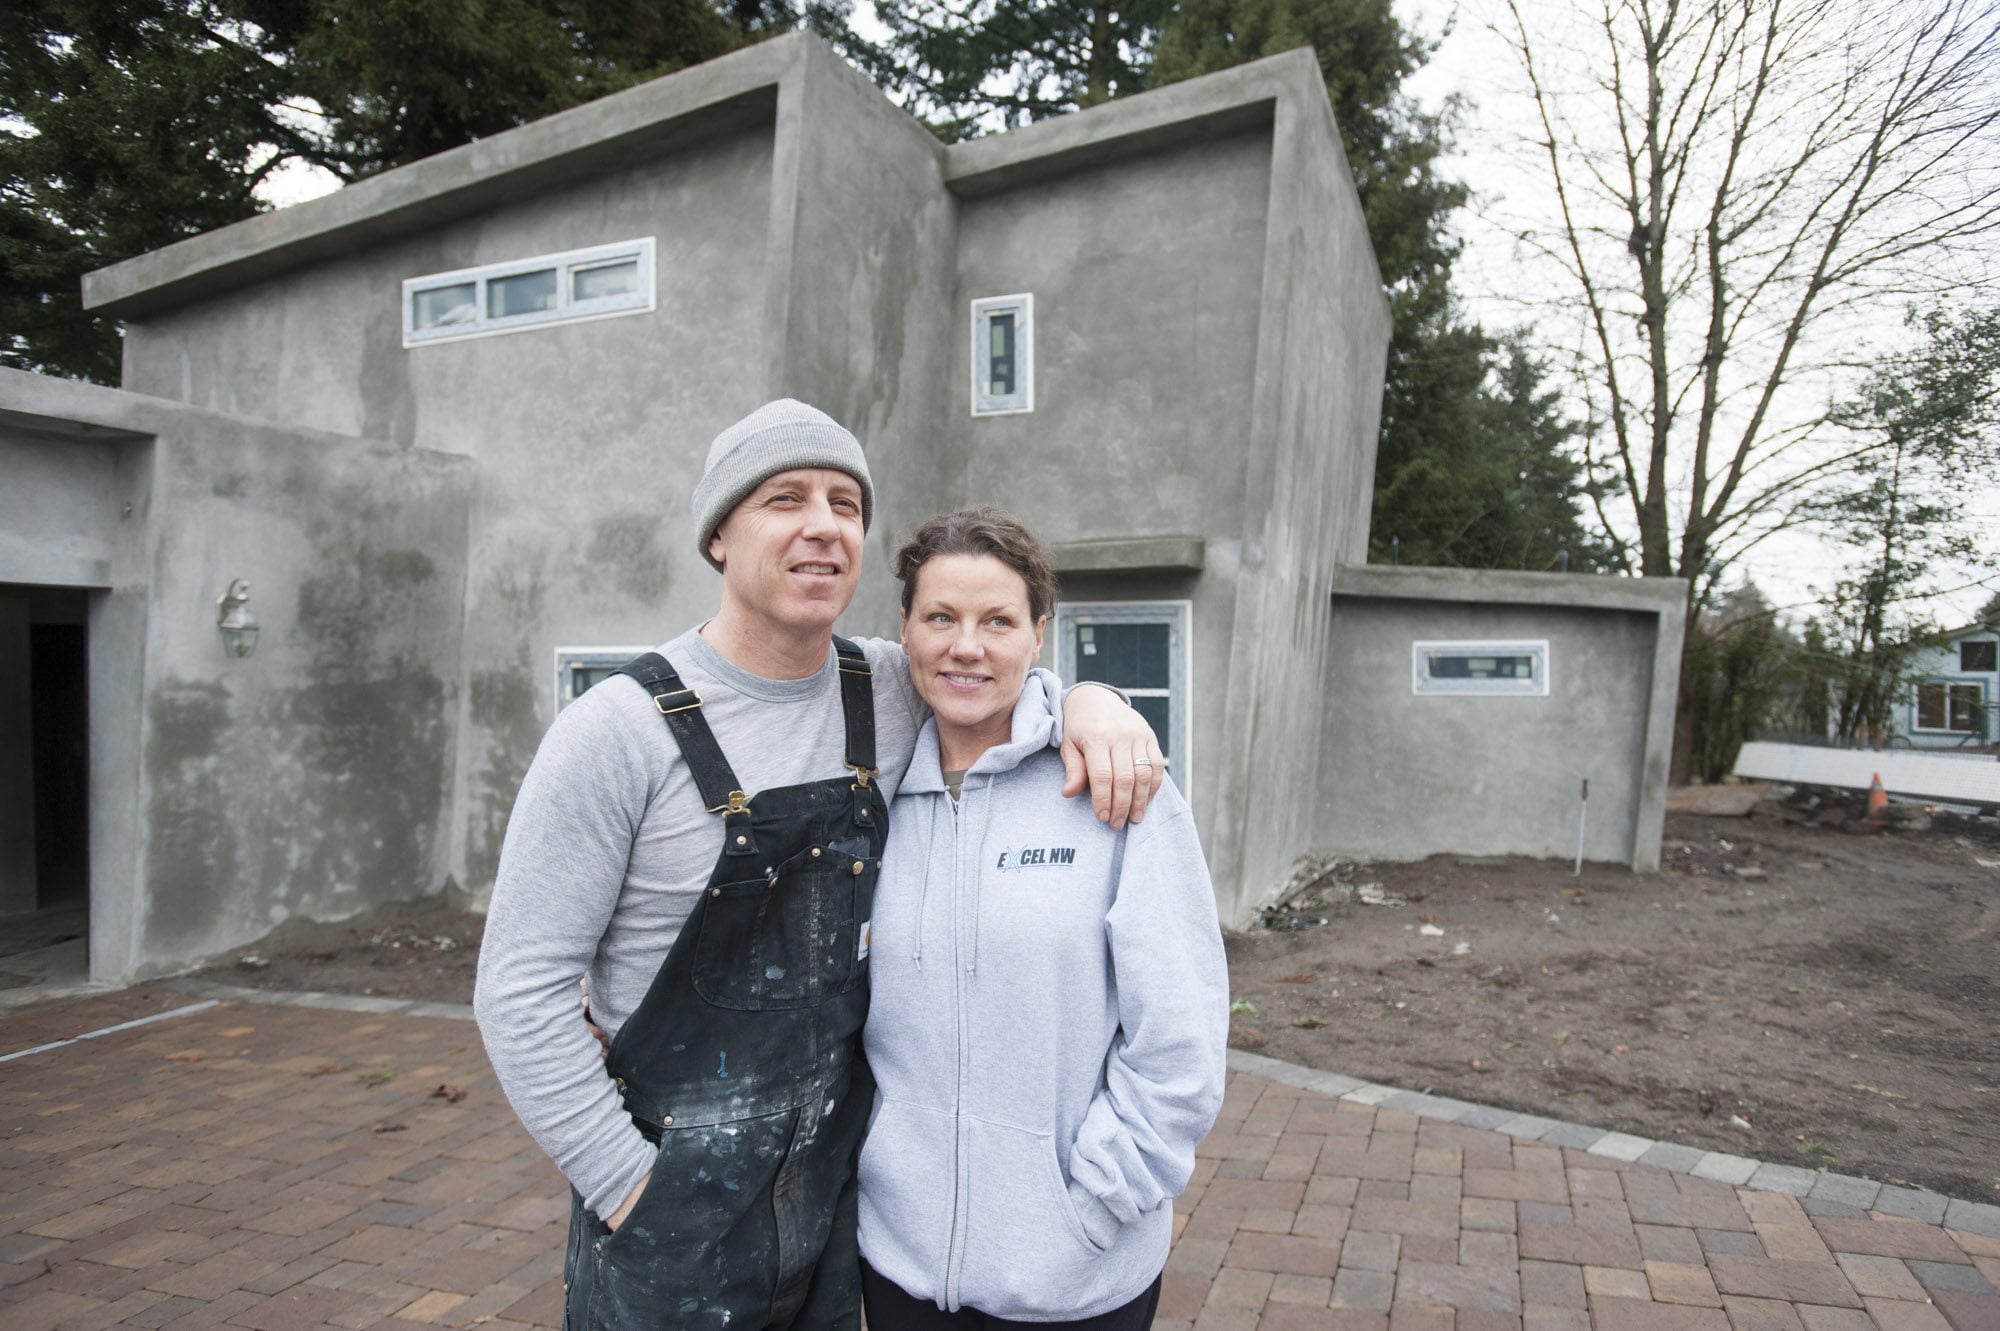 After living in Arizona for 16 years, Stefan and Angela Walz returned to Vancouver and had trouble finding an affordable home. Their solution: They bought an unfinished concrete home. &quot;We&#039;ve had a lot of people come by and say these are just like the houses that my family builds in Mexico,&quot; Stefan said.